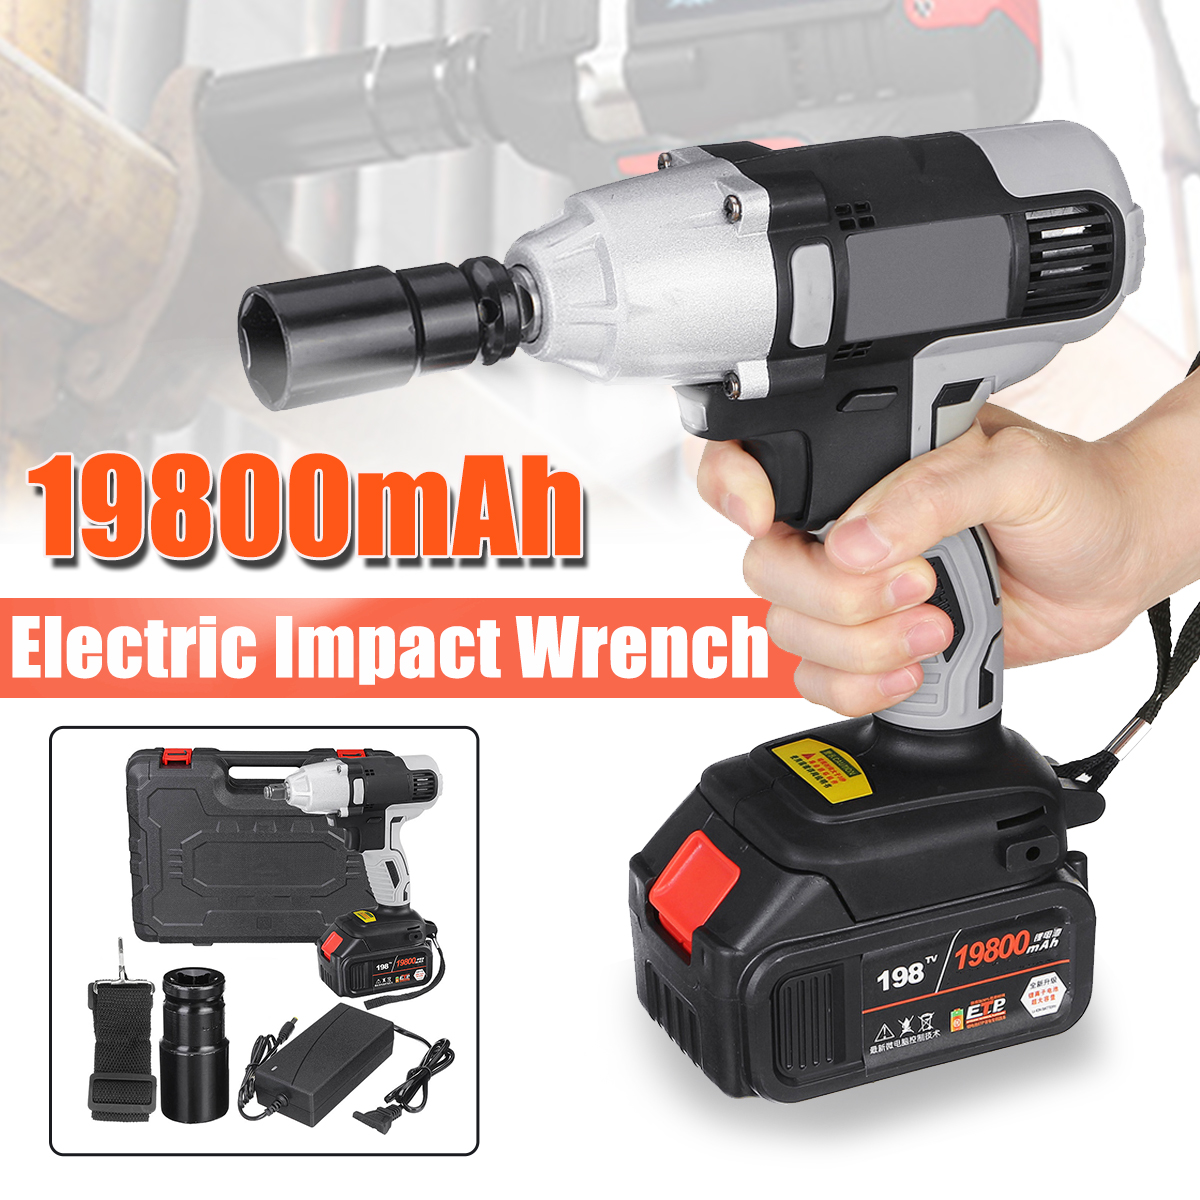 19800mAh-Lithium-Battery-Wrench-Multifunctional-300Nm-Electric-Cordless-Impact-Wrench-1449387-2